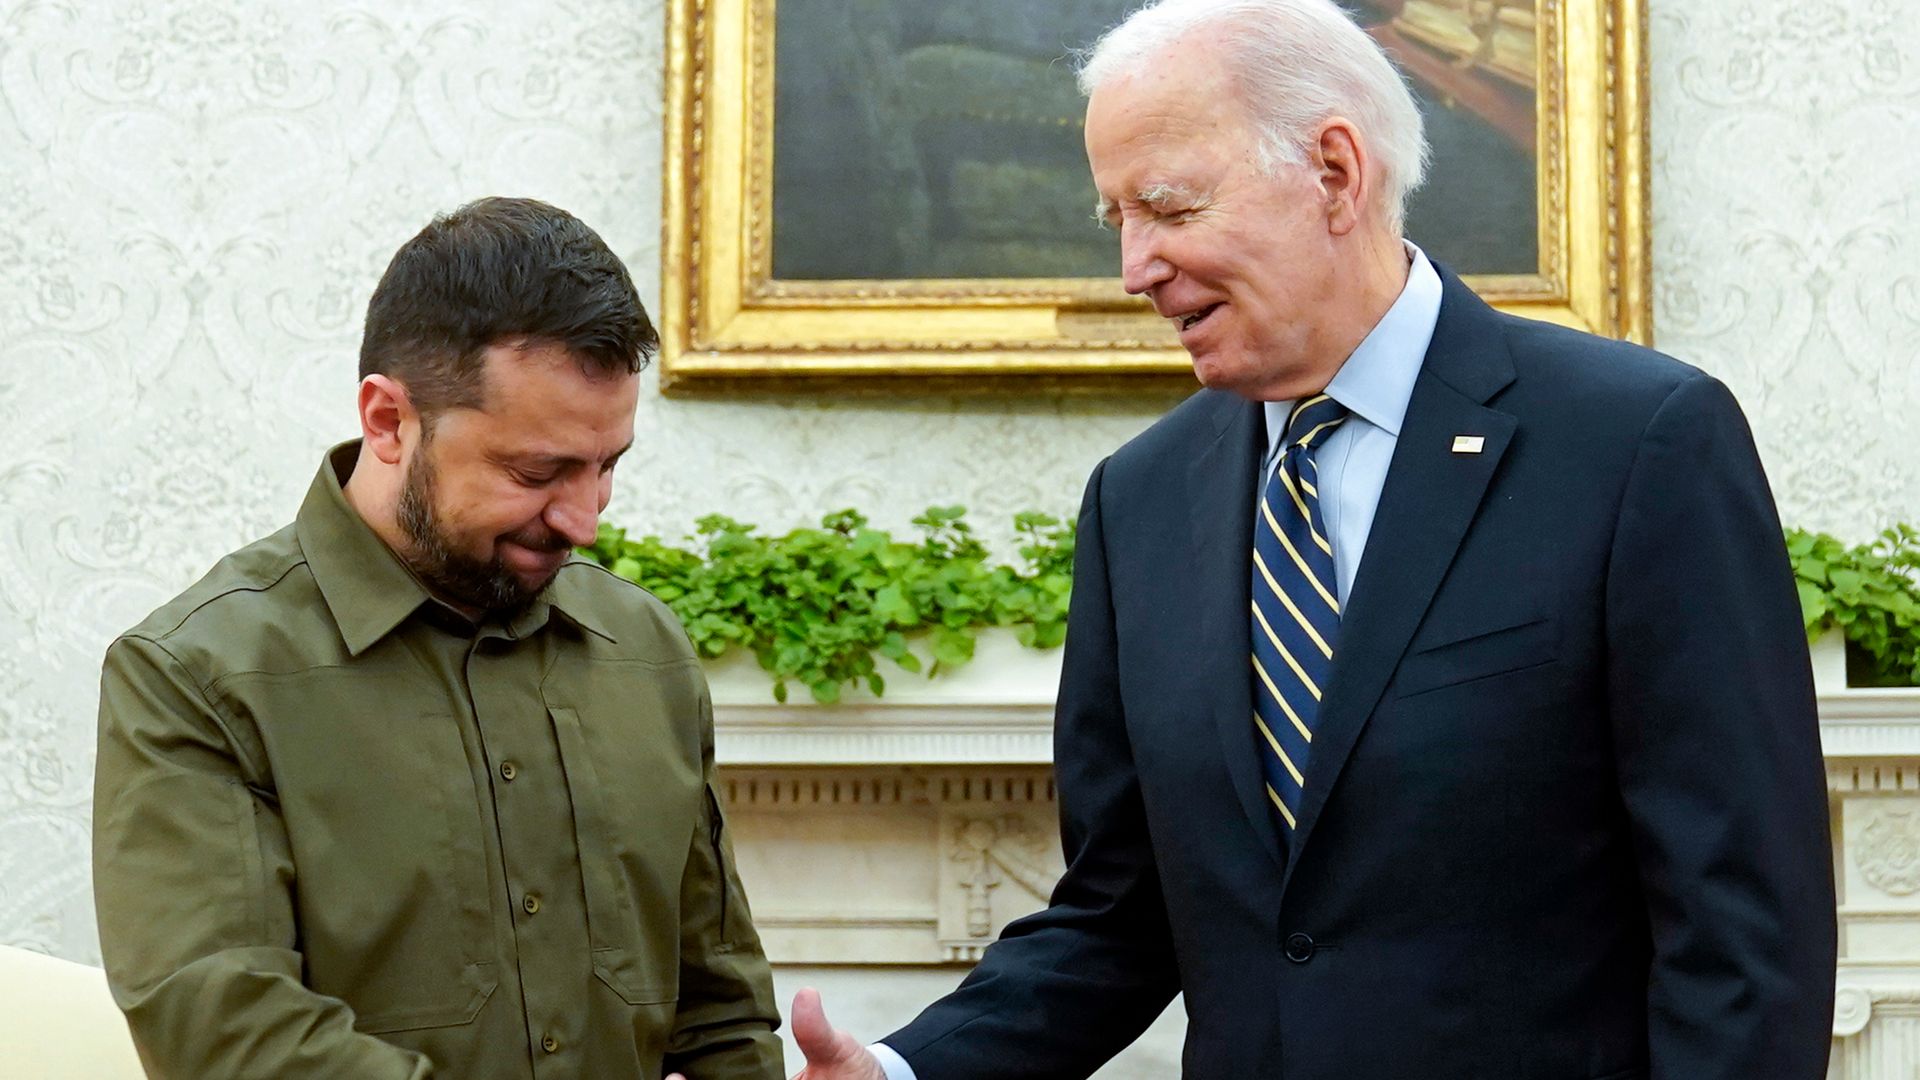 The Biden administration is sending it's 47th installment of support to Ukraine since Aug. 2021, this package totaling 5 million.